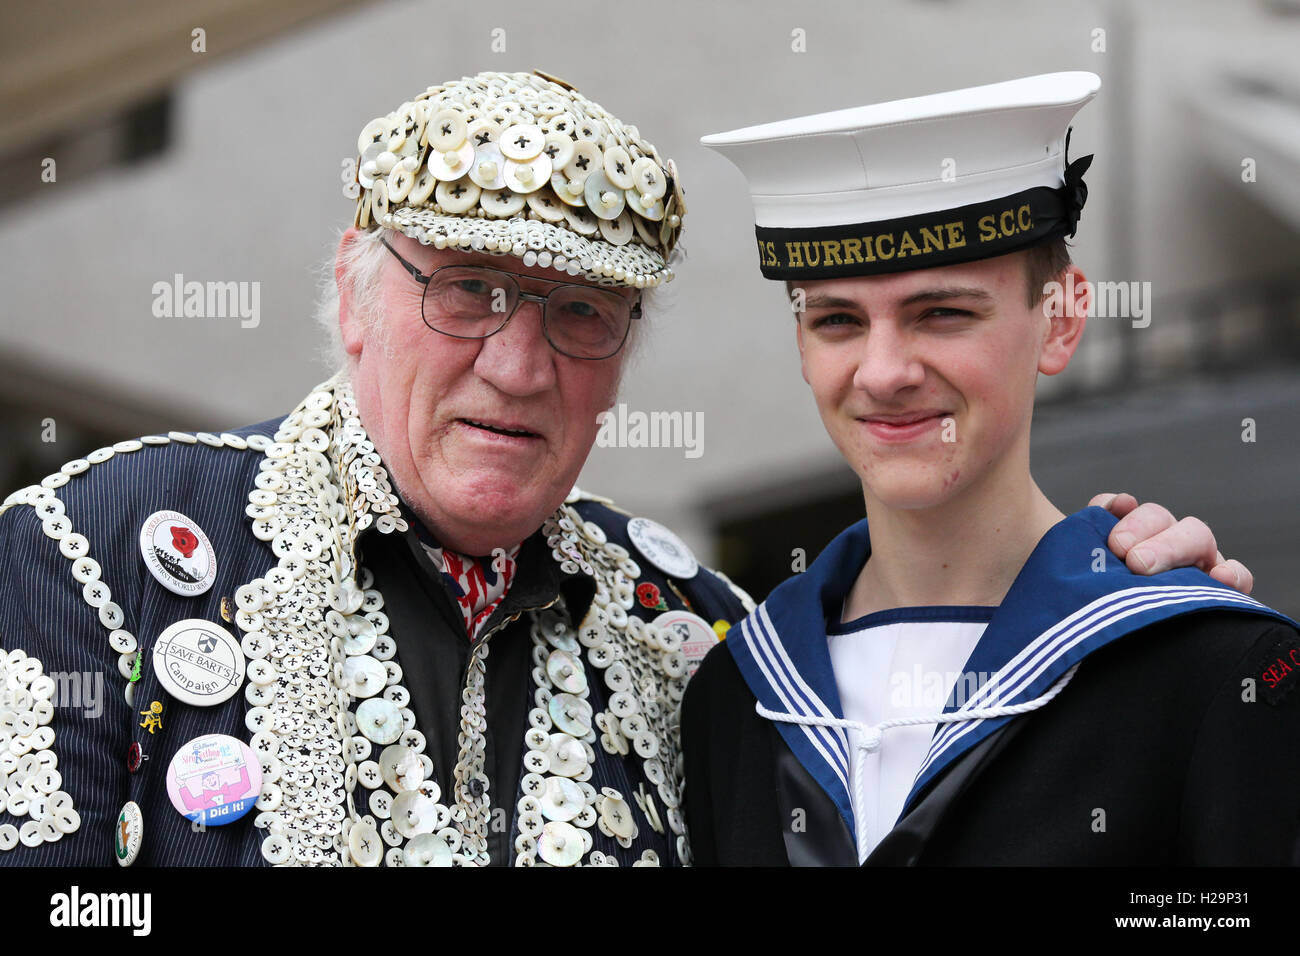 Guildhall Yard, London, UK. 25th Sep., 2016. The annual Pearly Kings and Queens & Costermongers harvest festival at the Guildhall in London. Each year on the last Sunday of September, London's Pearly Kings and Queens come together to welcome new season in style with extravagant Smother Suits covered top to toe in sparkly buttons, badge and glitter. Credit:  Dinendra Haria/Alamy Live News Stock Photo